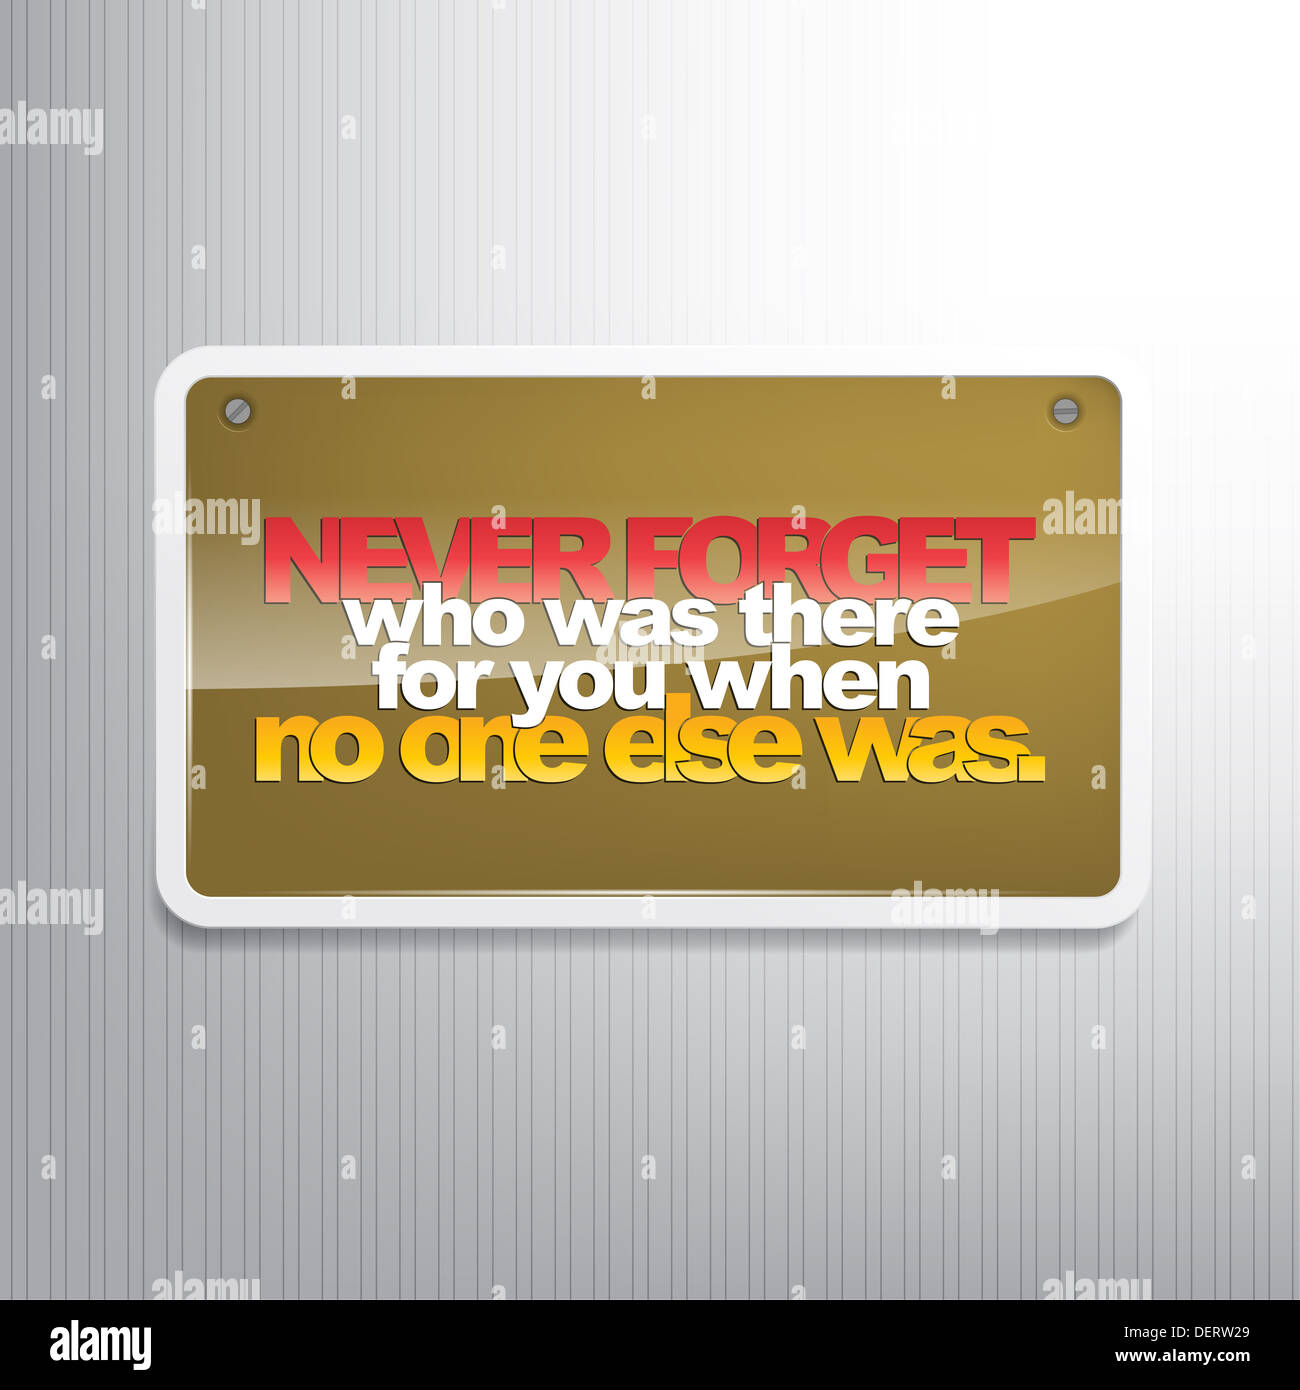 Never Forget who was ther for you when no one else was. Motivational sign. Stock Photo